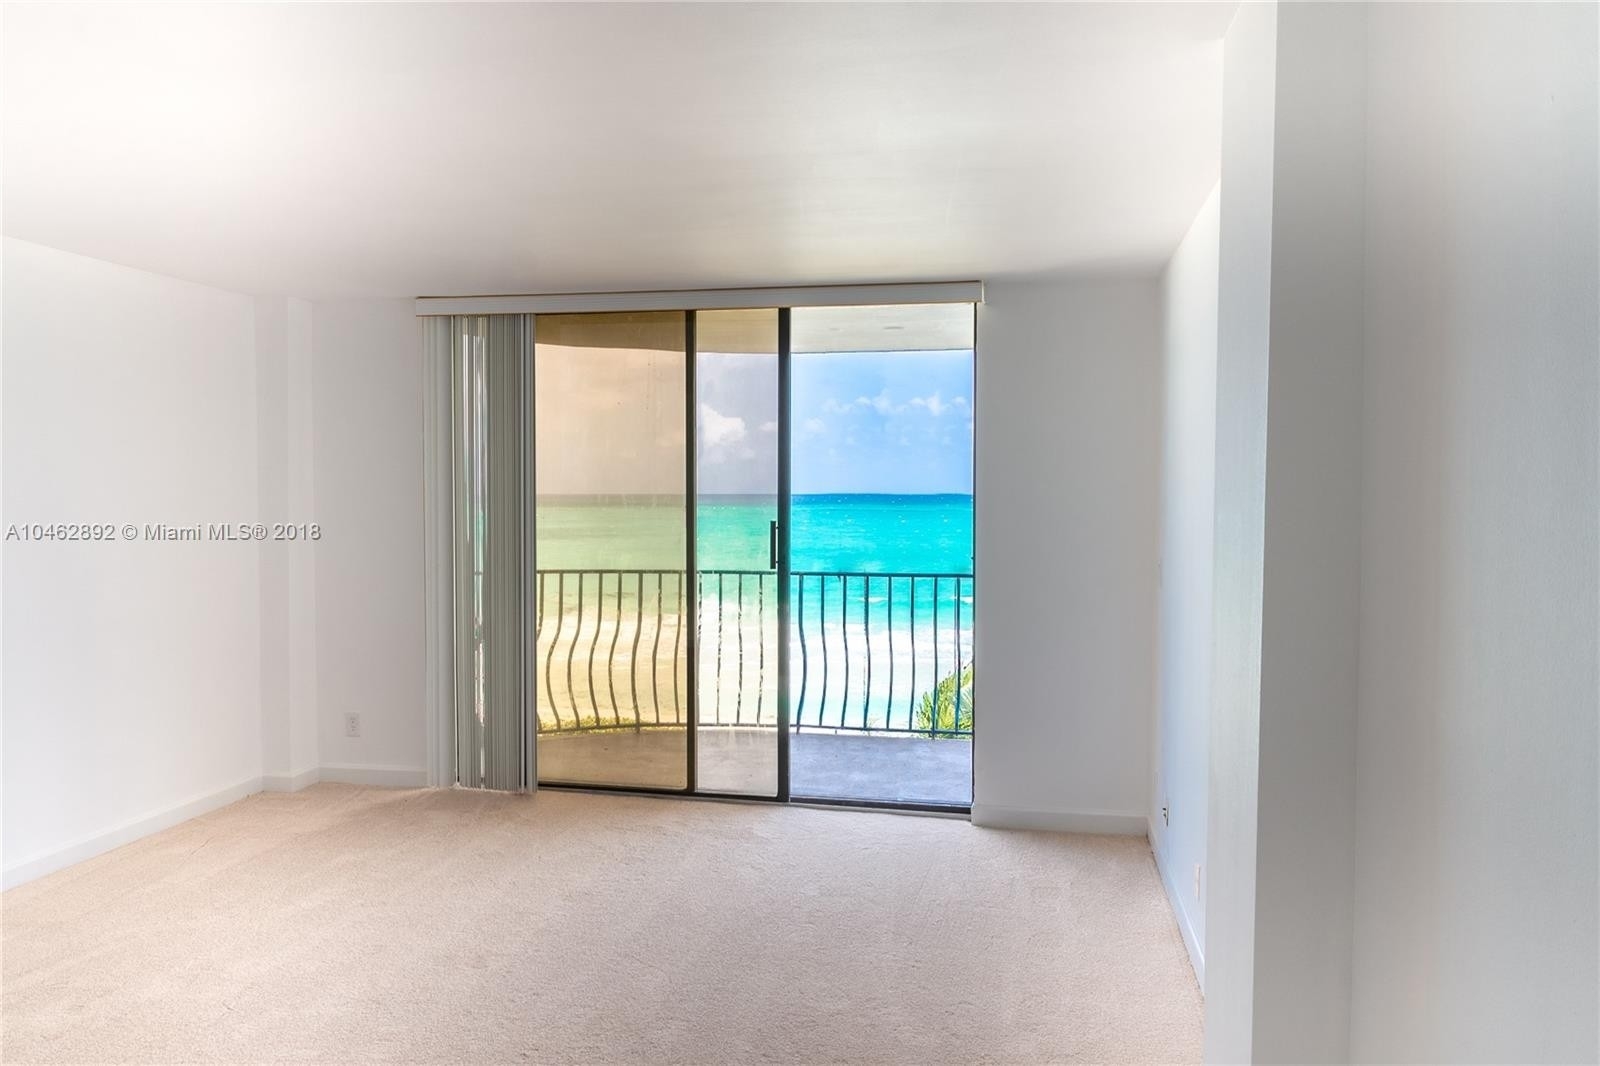 6. Condominiums at 8877 Collins Ave, 610 Surfside